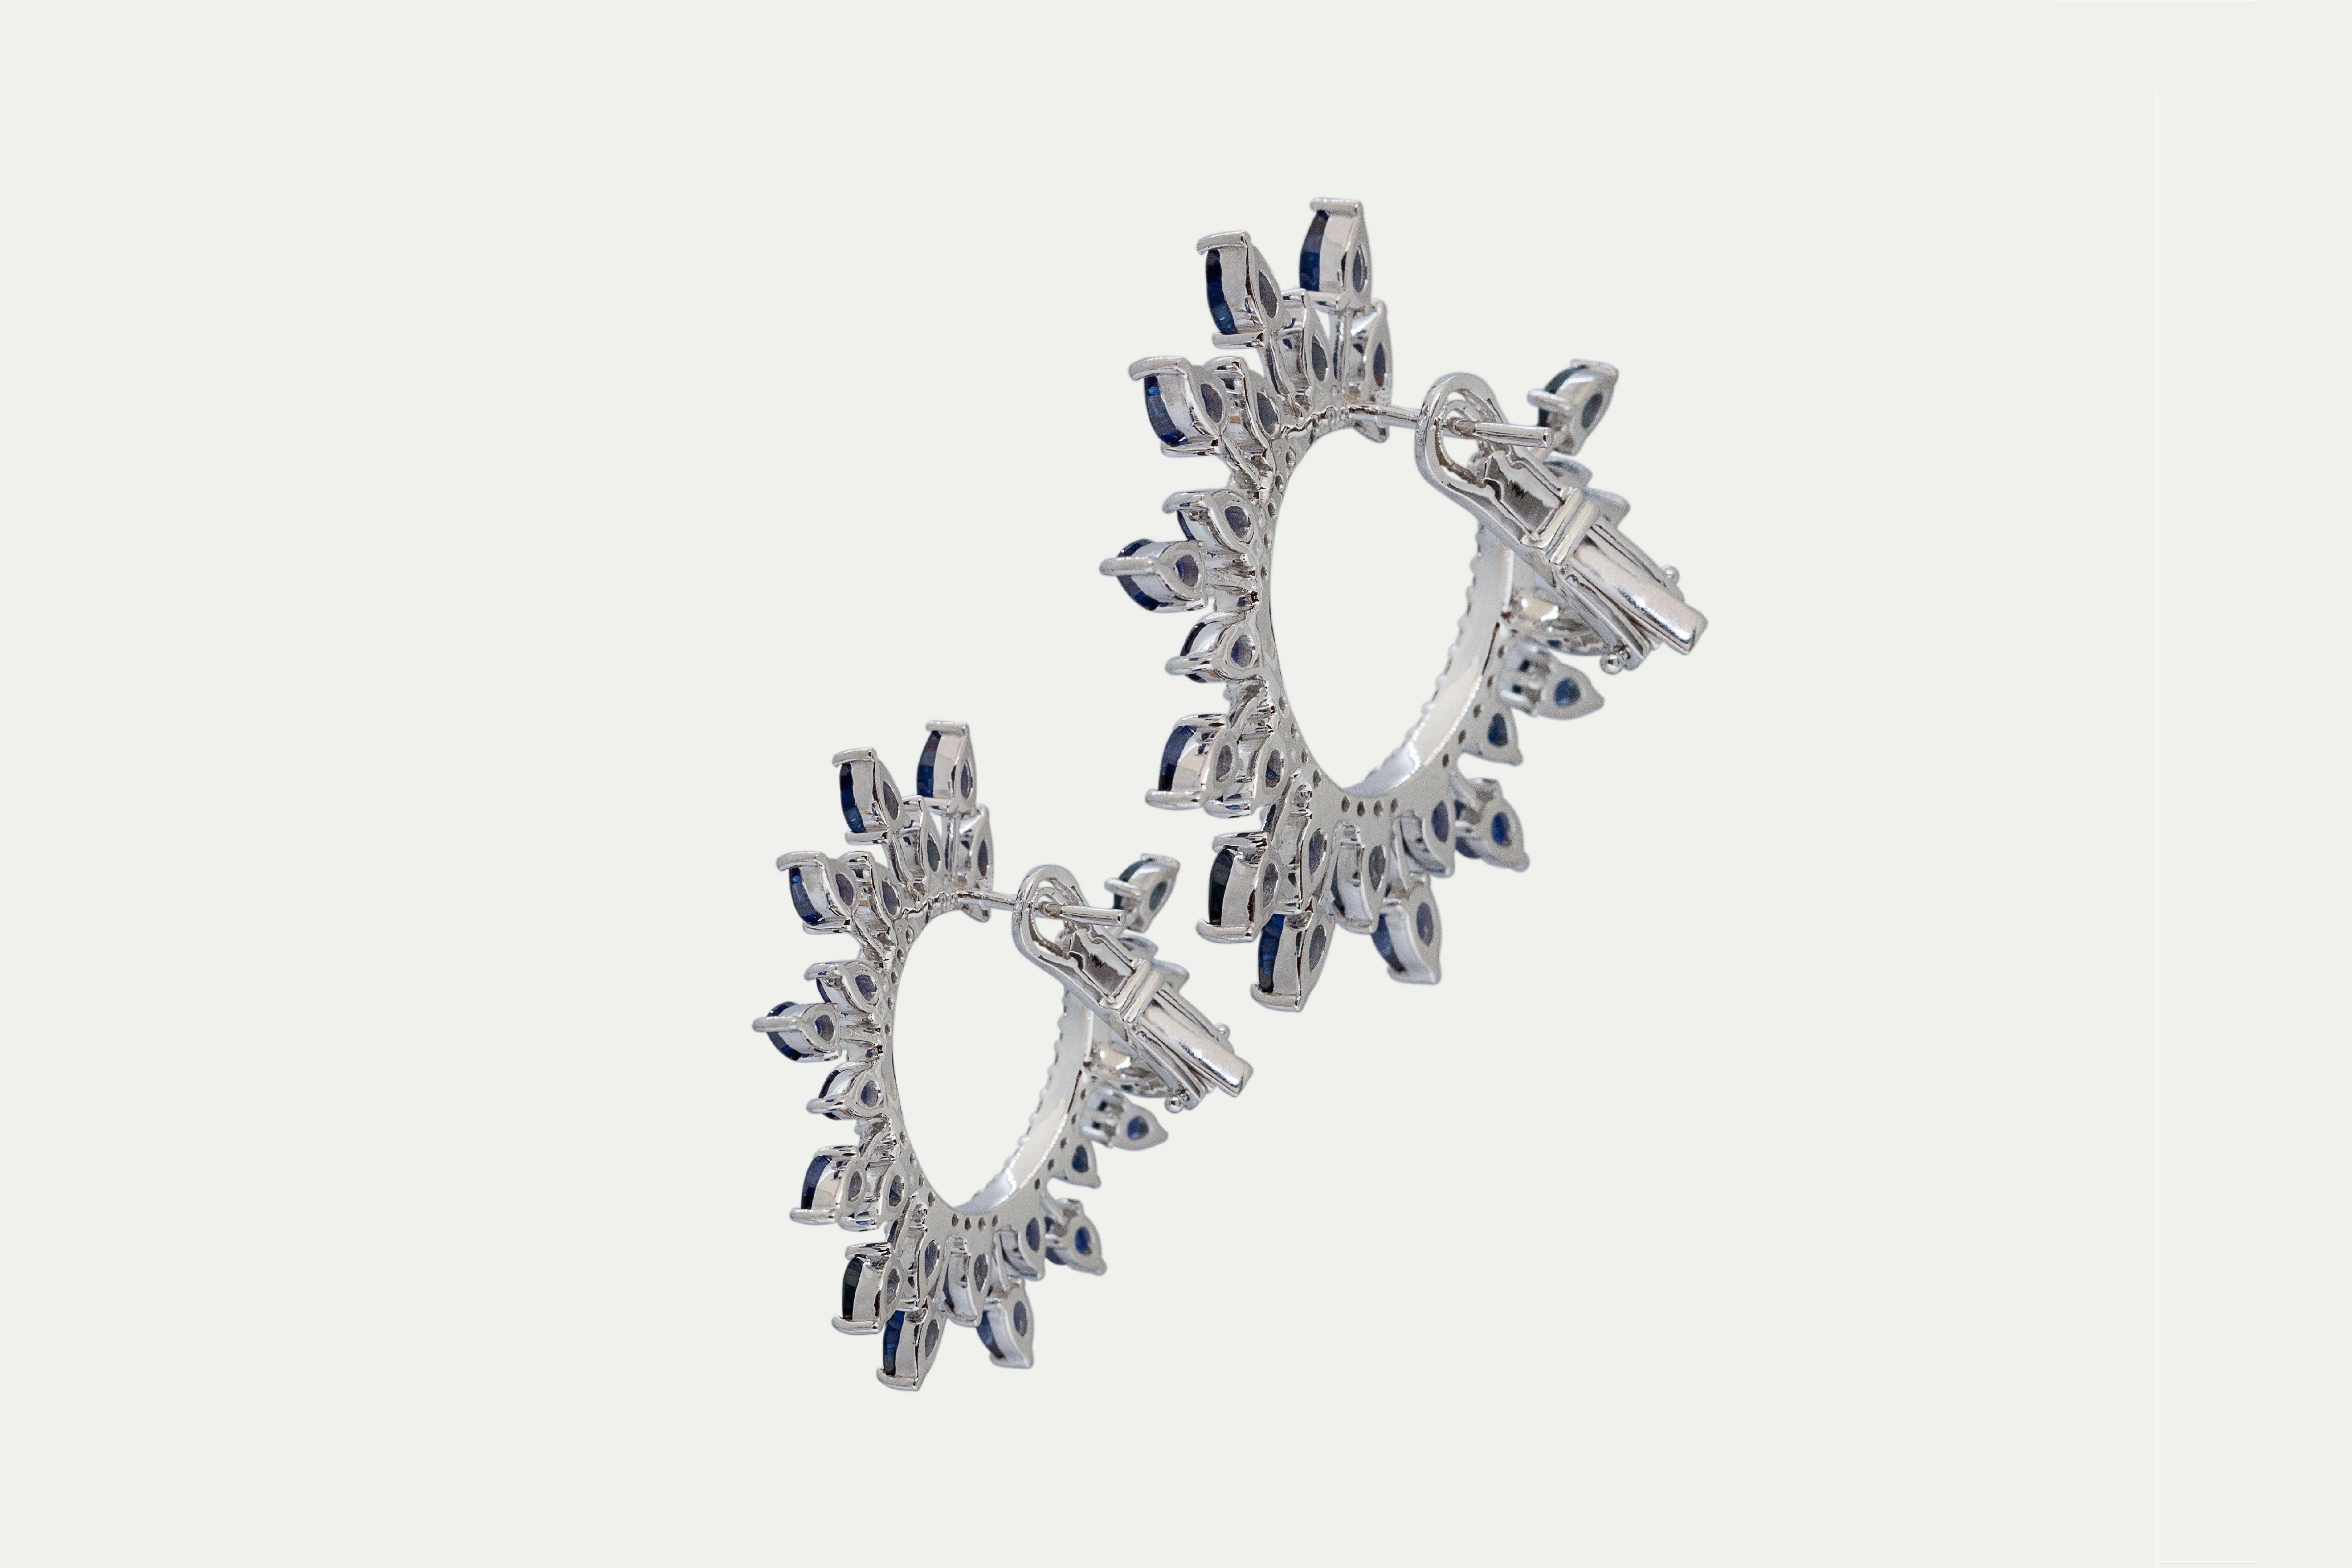 Earrings 18k white gold with 72 round diamonds, Carat total weight 0.96 and 48 blue sapphire stones, Carat total weight 10.36